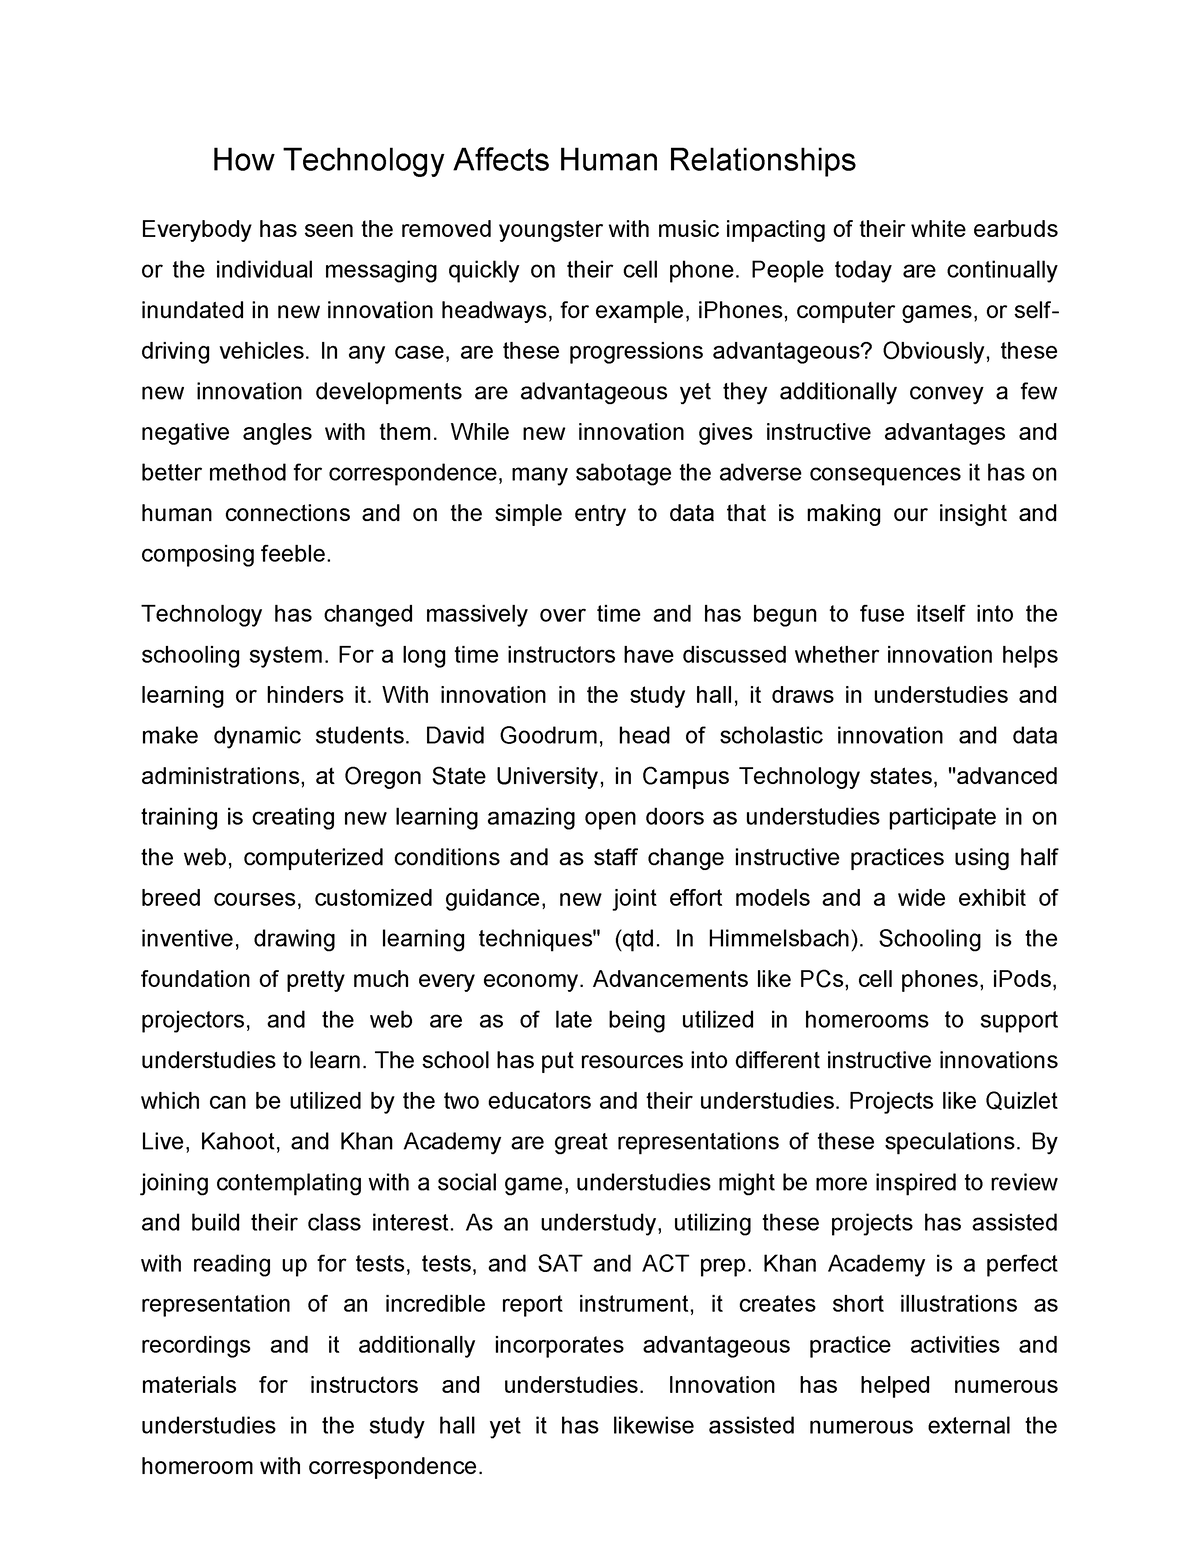 negative effects of technology on human relationships essay